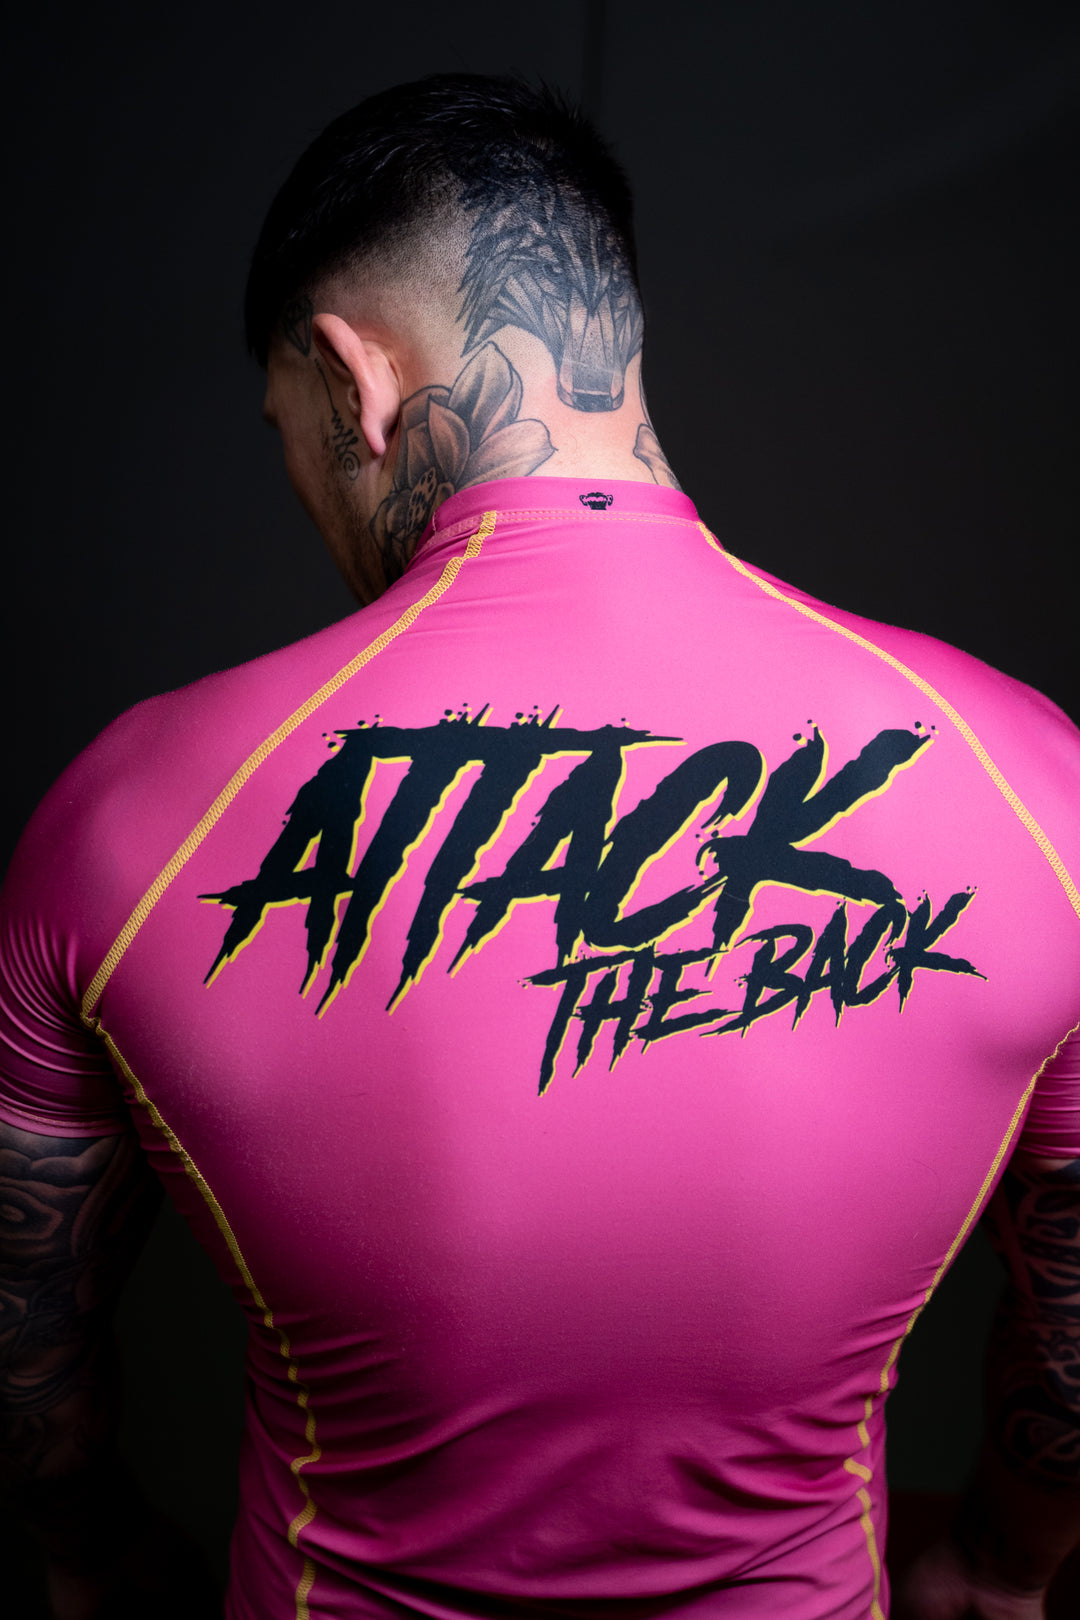 Attack The Back - Be Seen